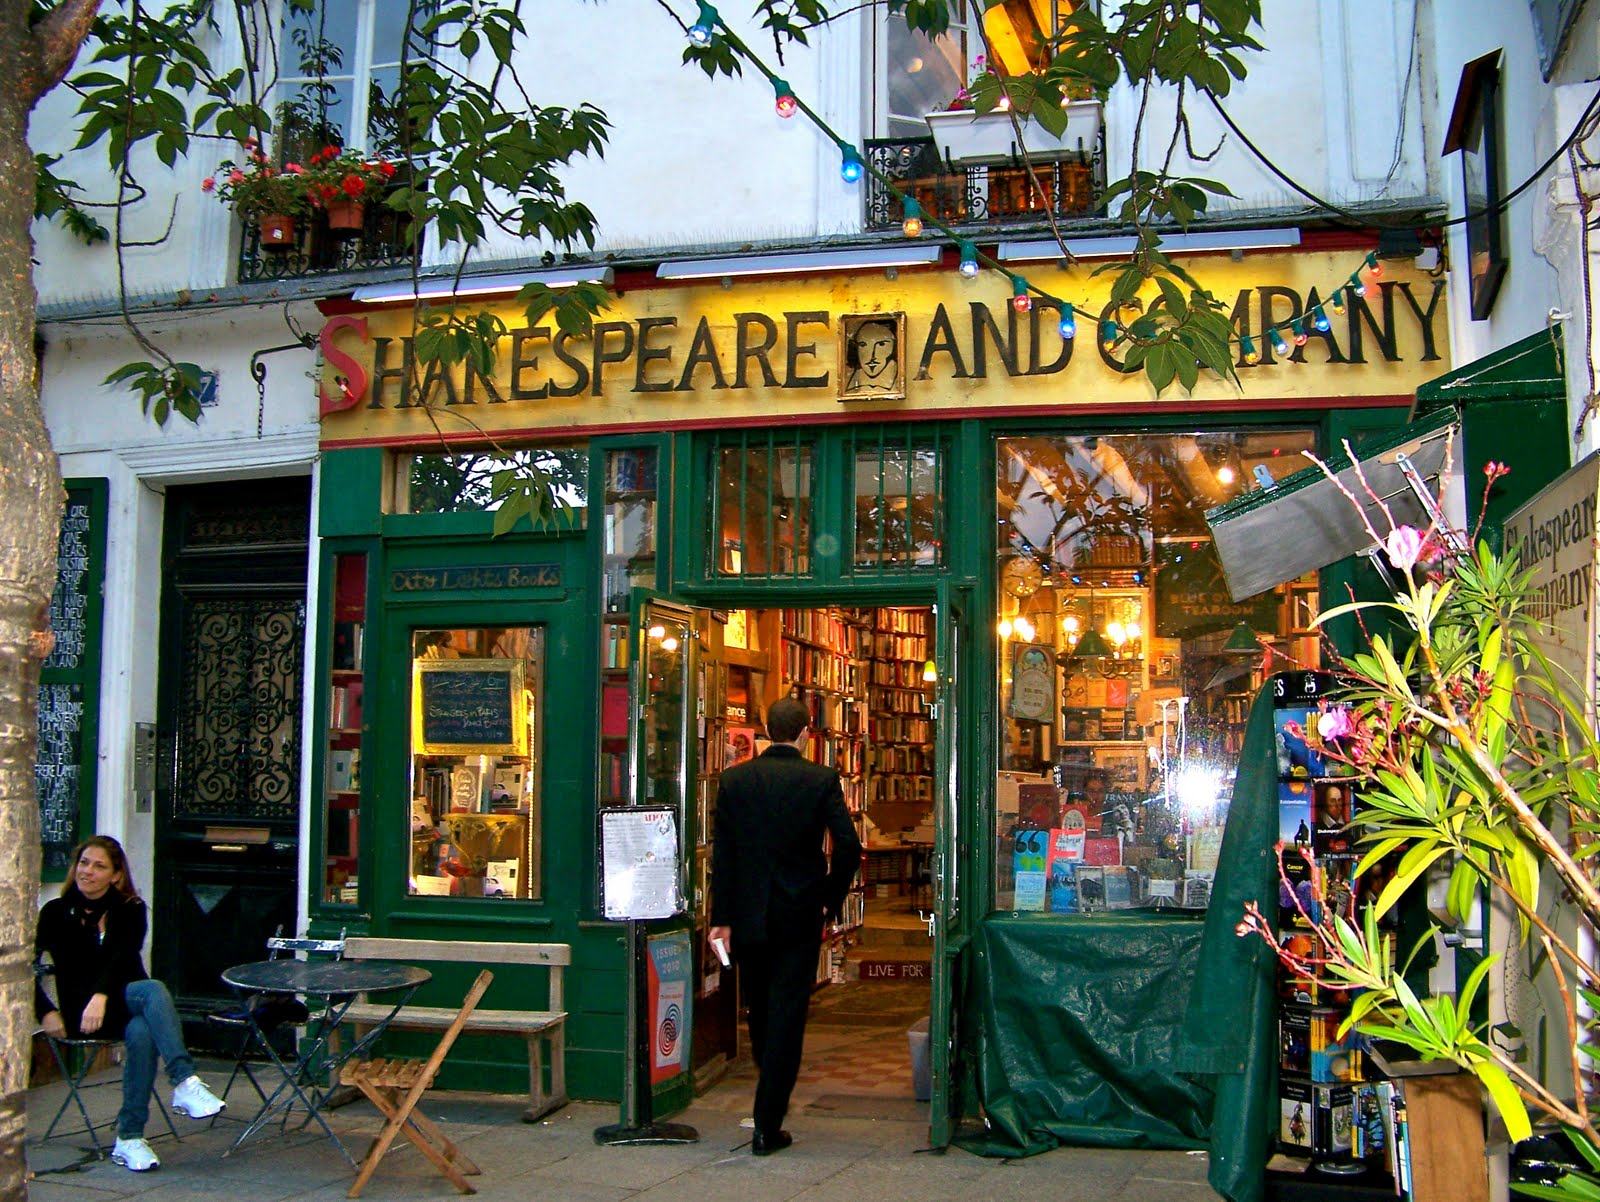 Shakespeare and CO.